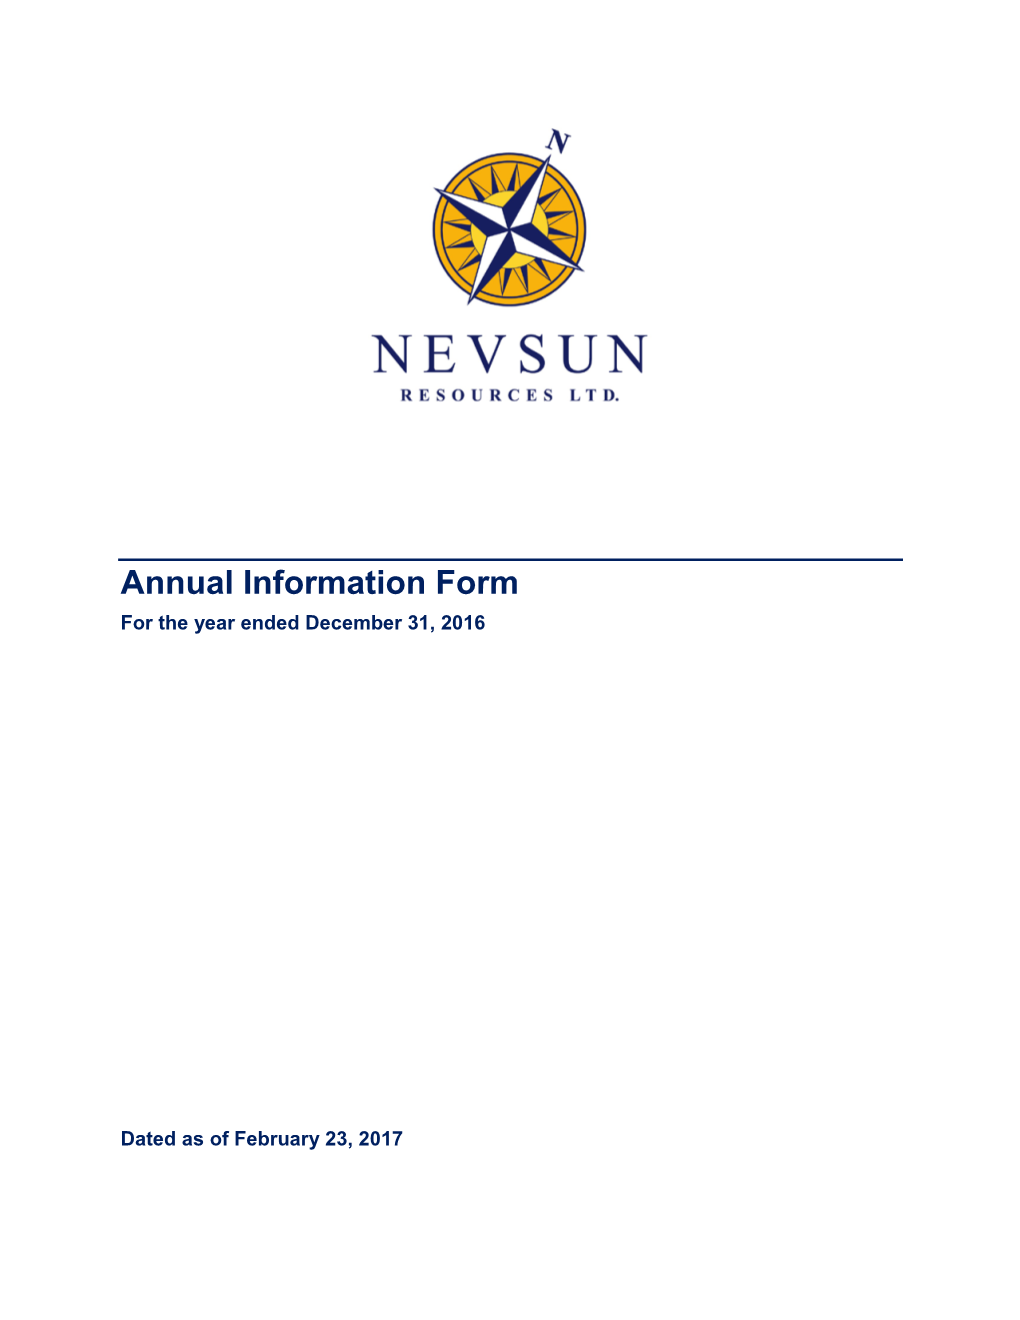 Annual Information Form for the Year Ended December 31, 2016